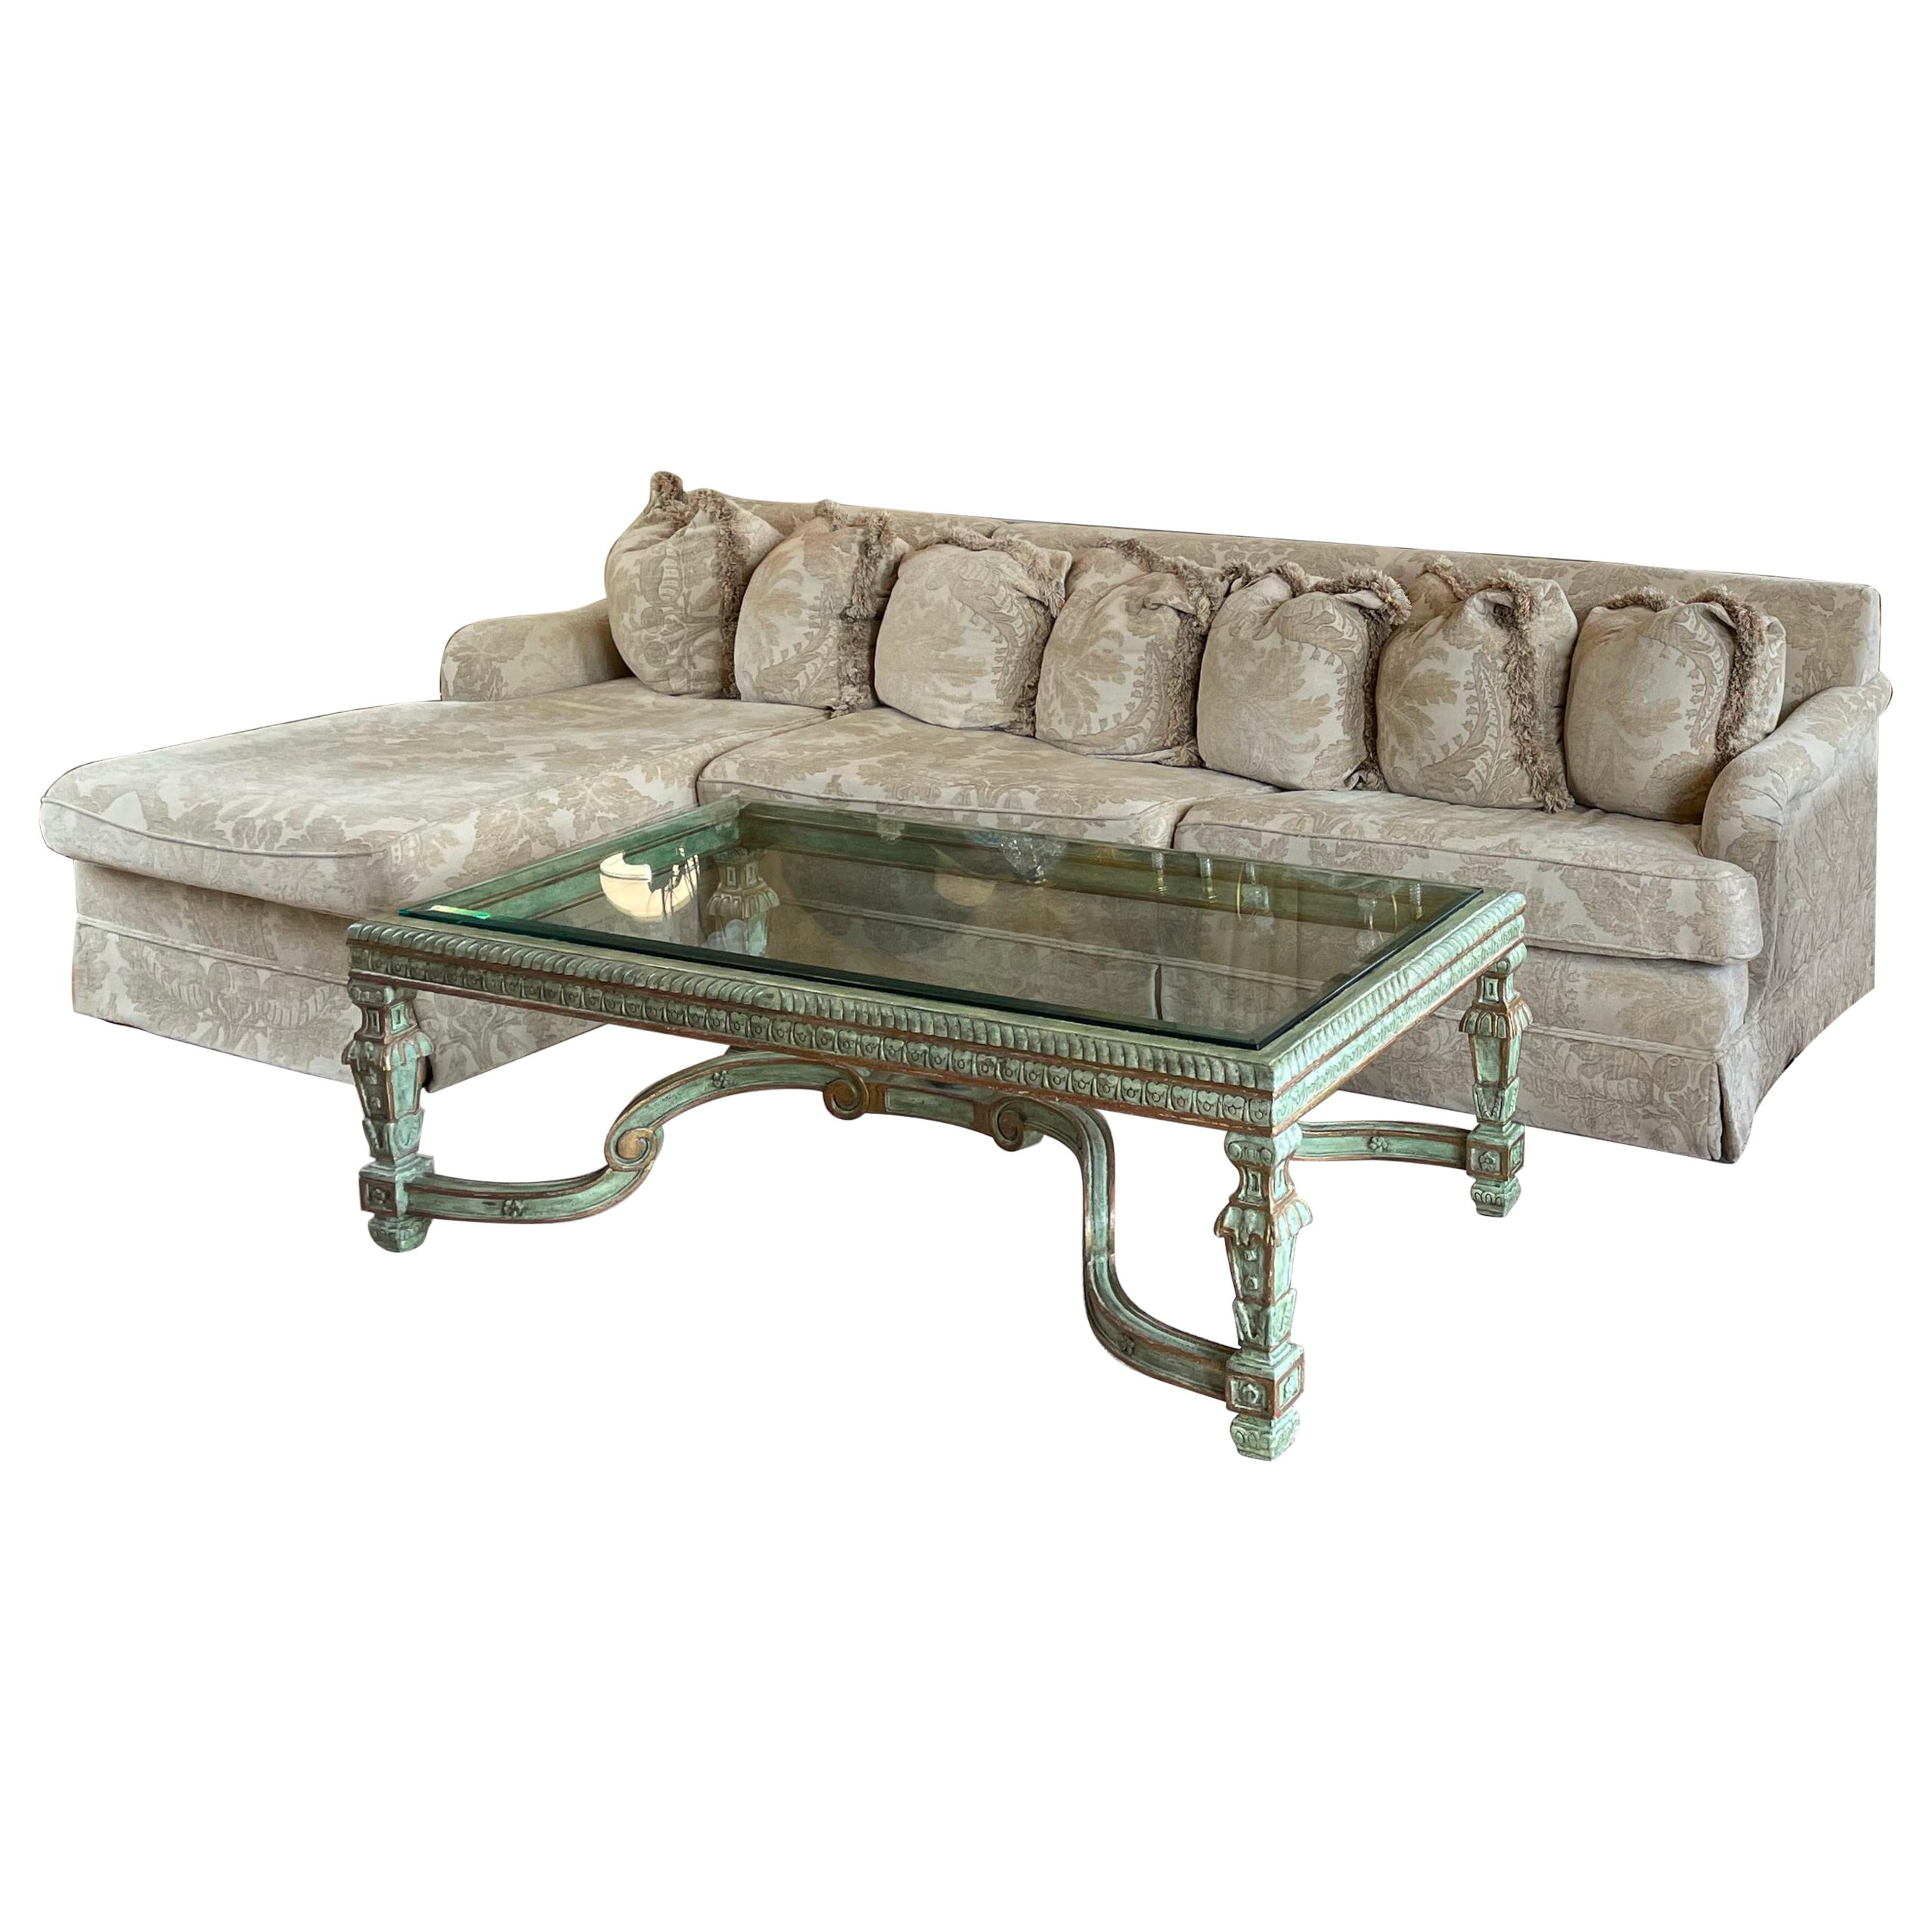 Traditional Custom Made Upholstered Sofa Bed with Chaise Lounge